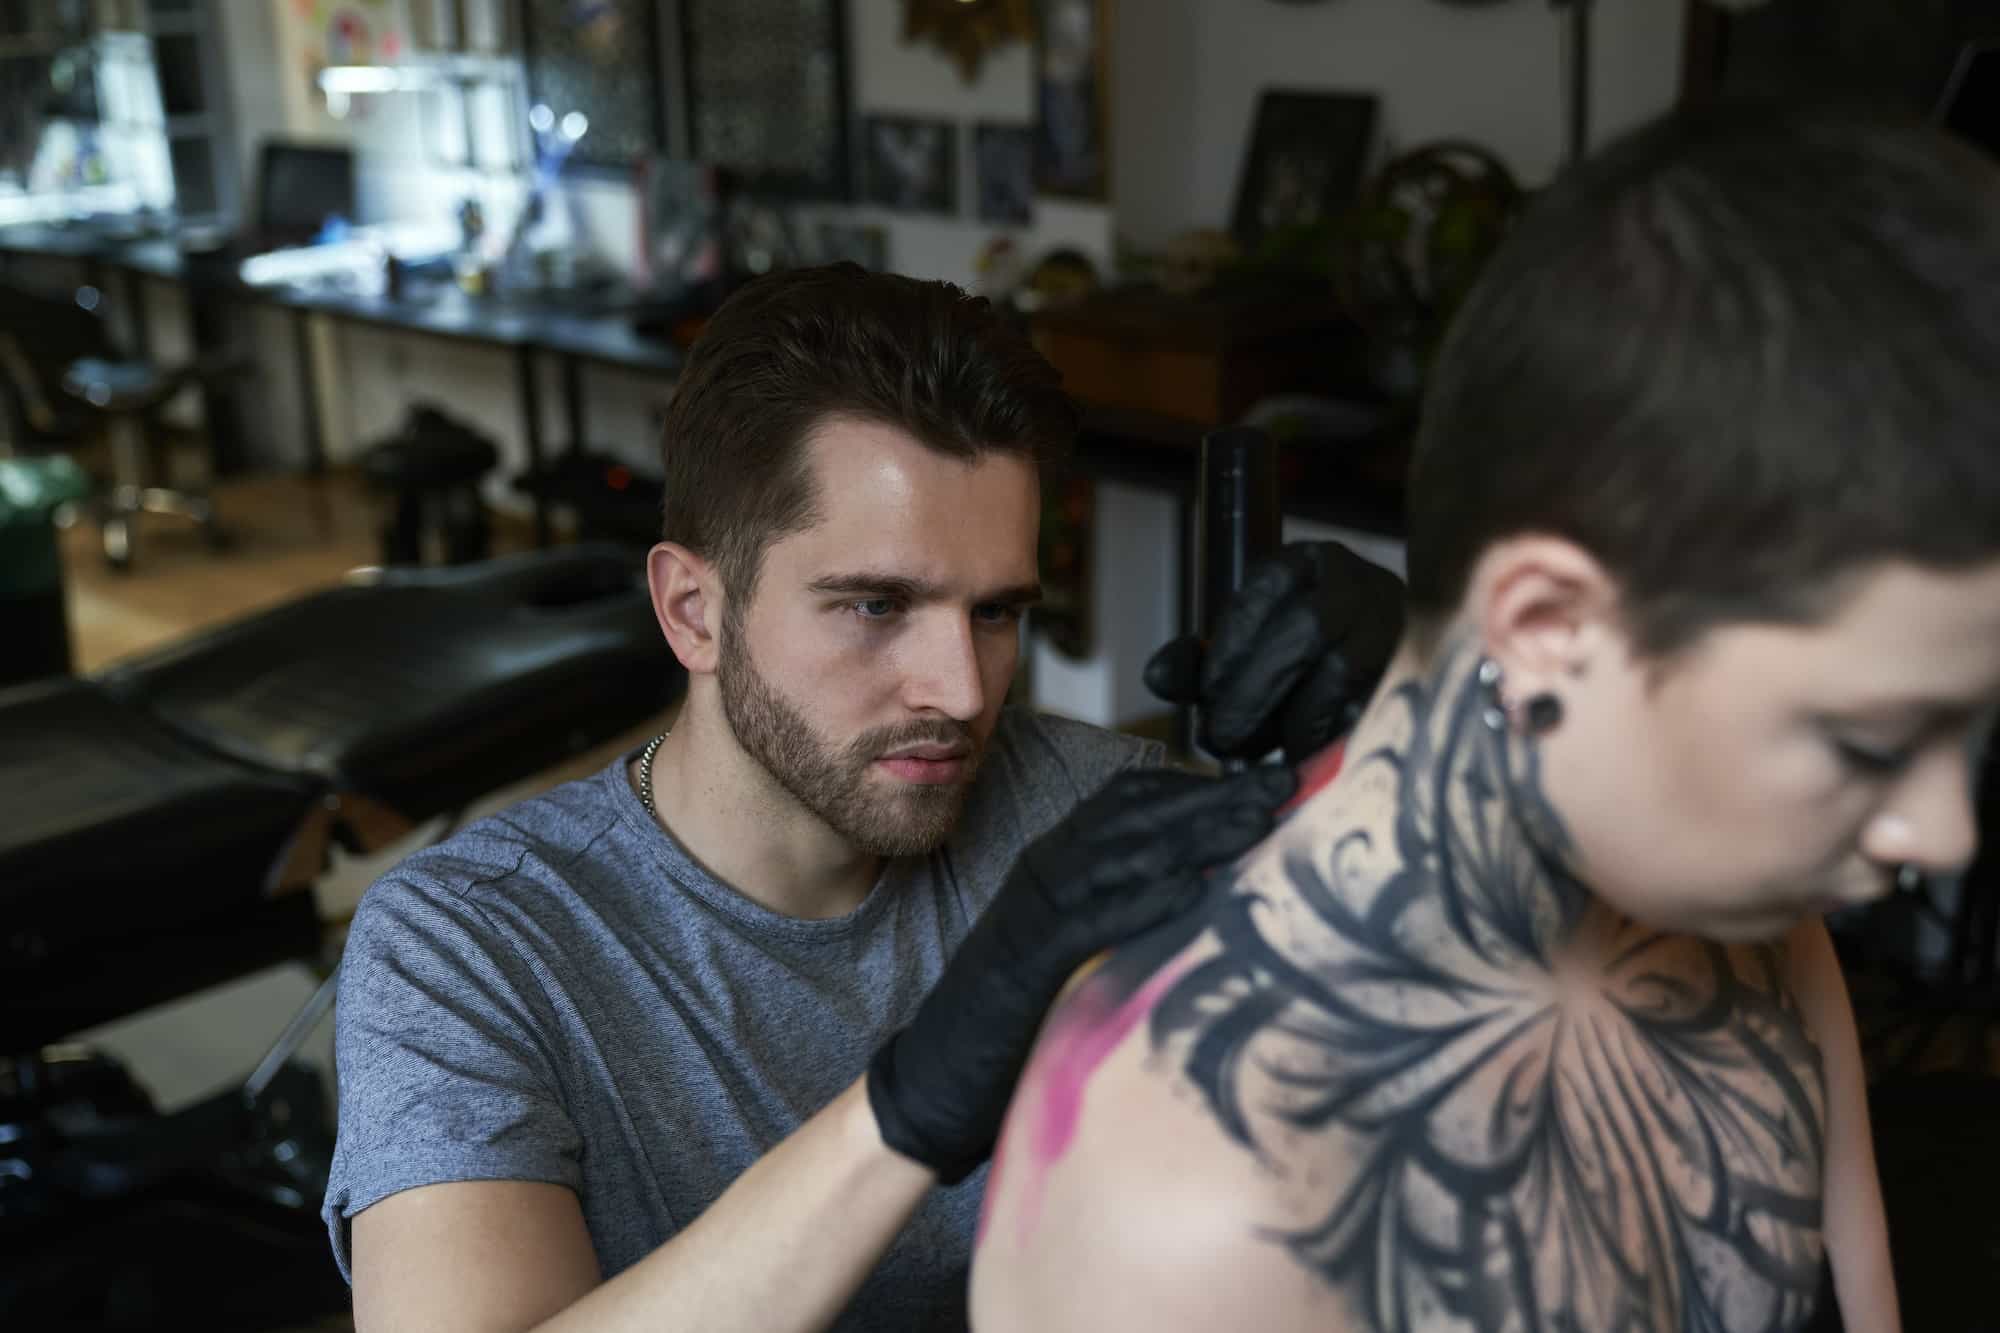 Focus caucasian man tattooing back of woman at the studio